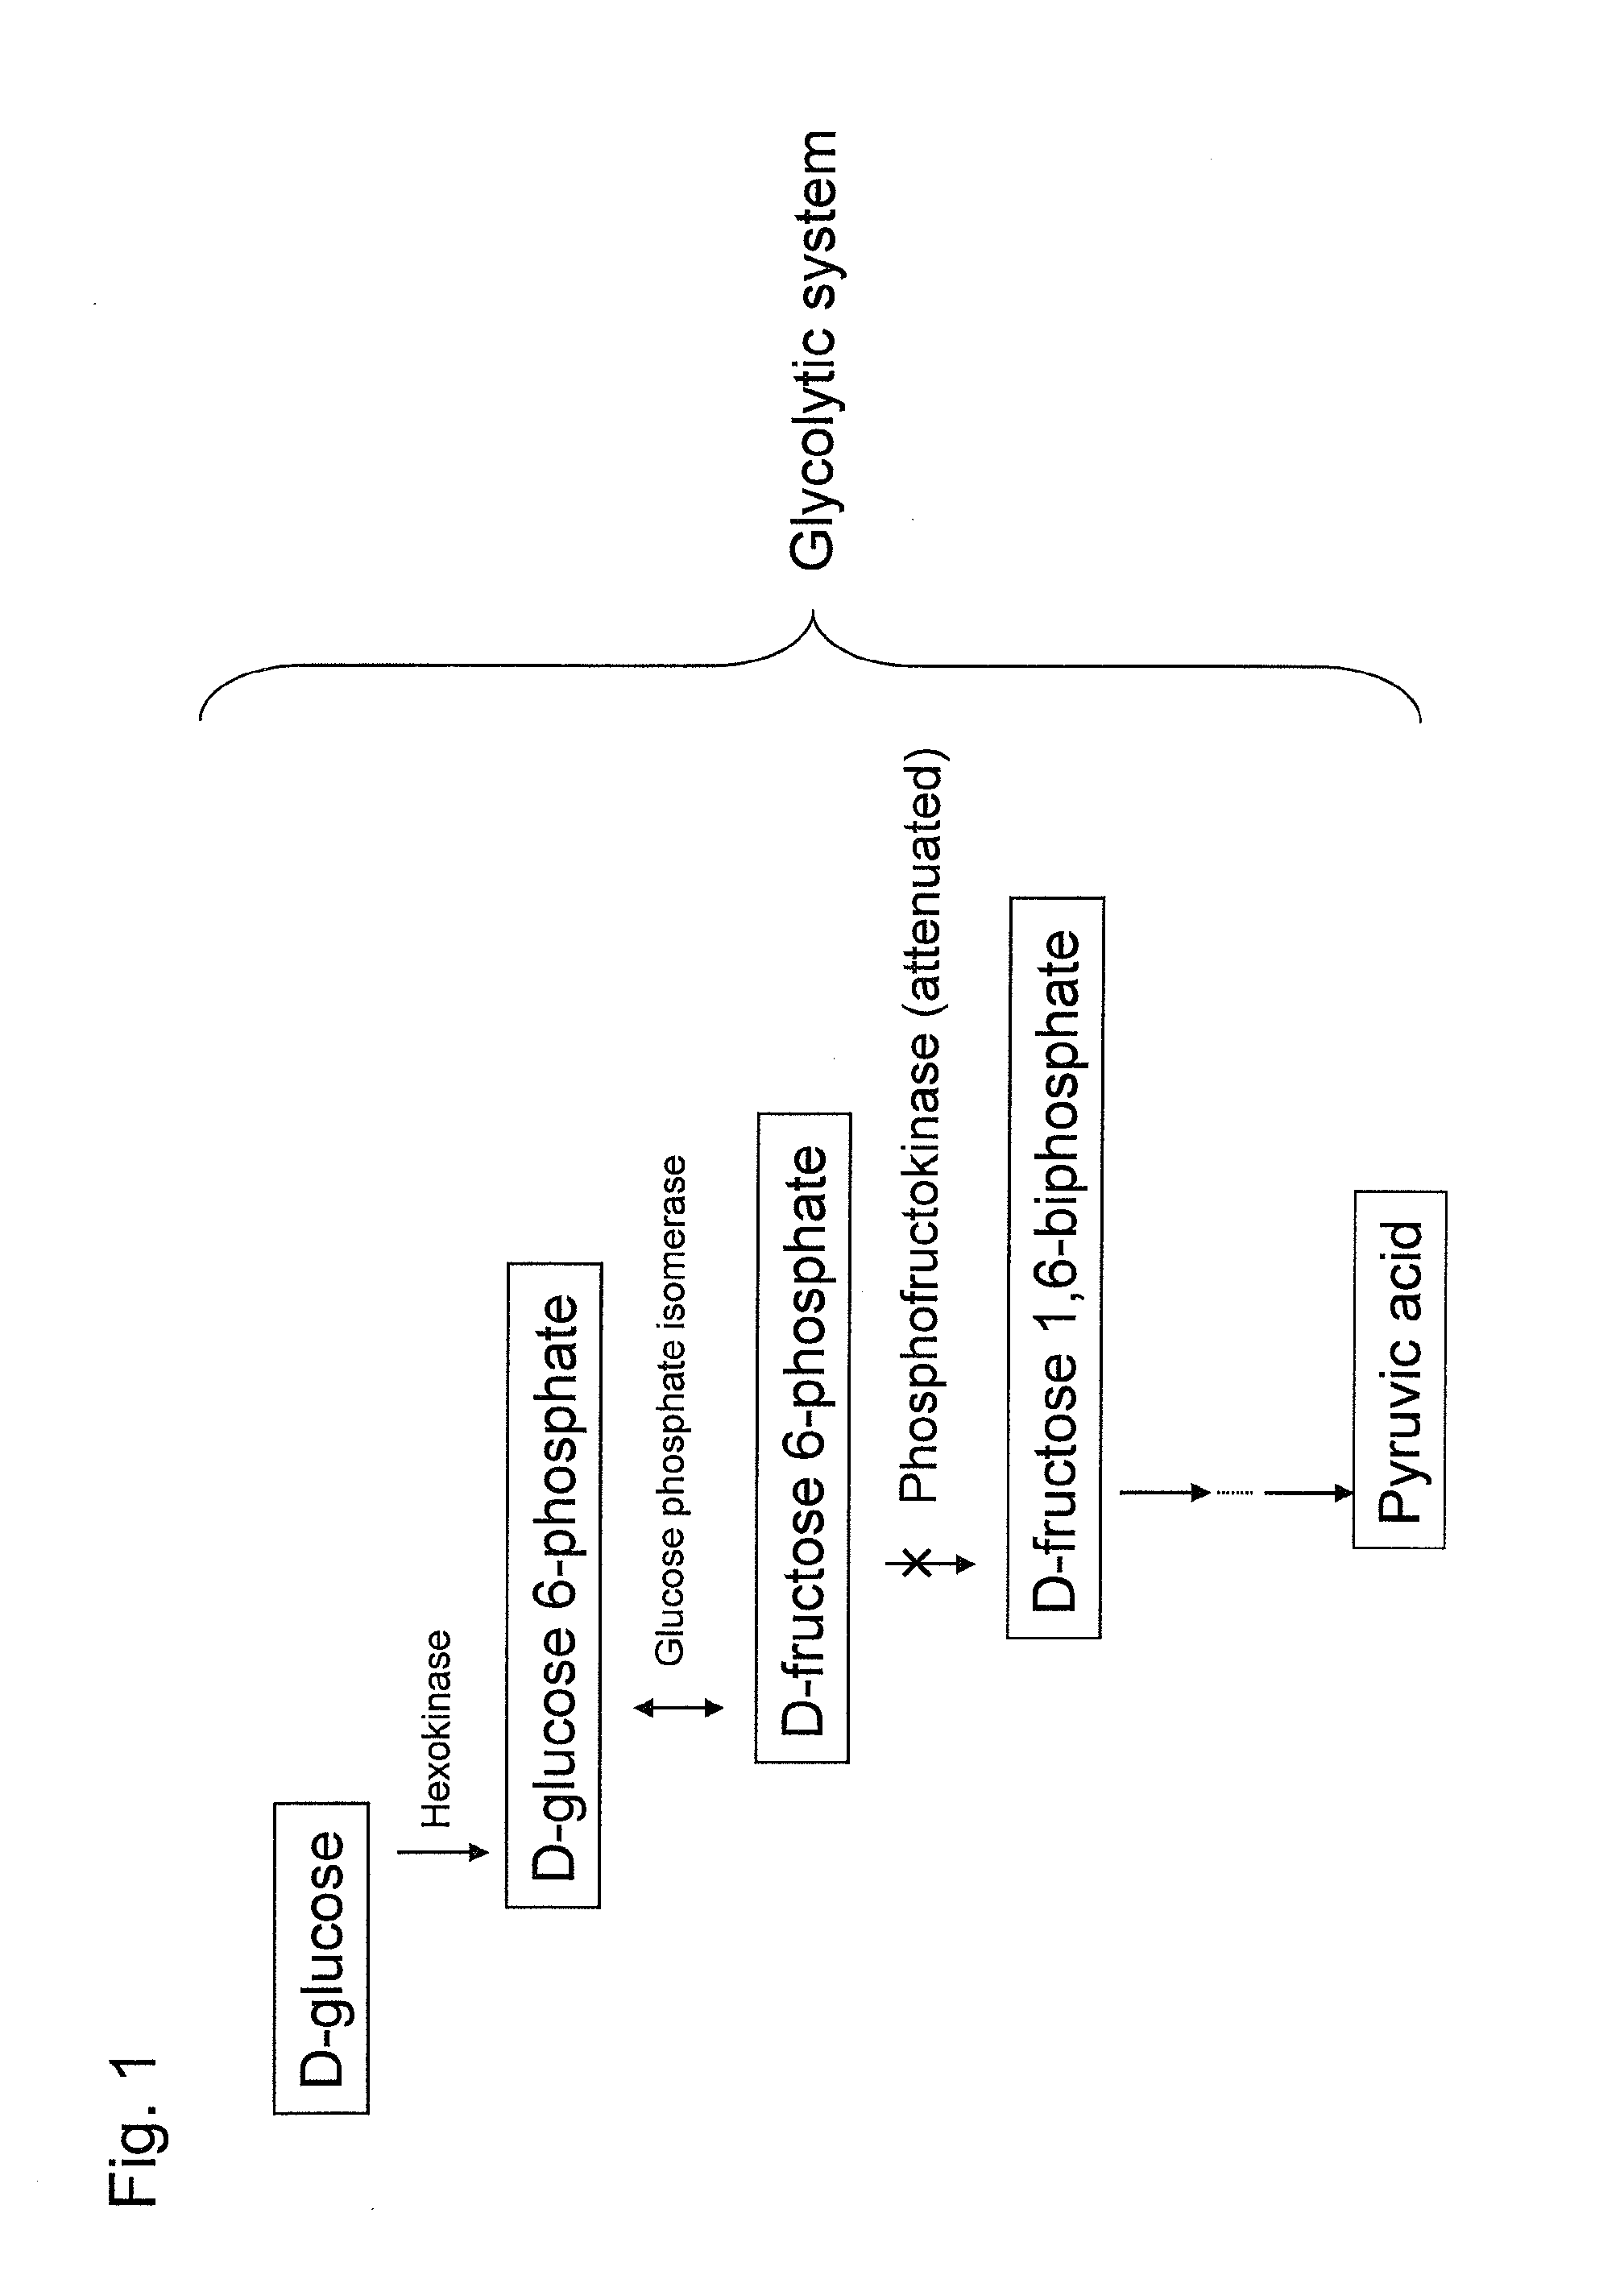 Recombinant yeast and substance production method using the same